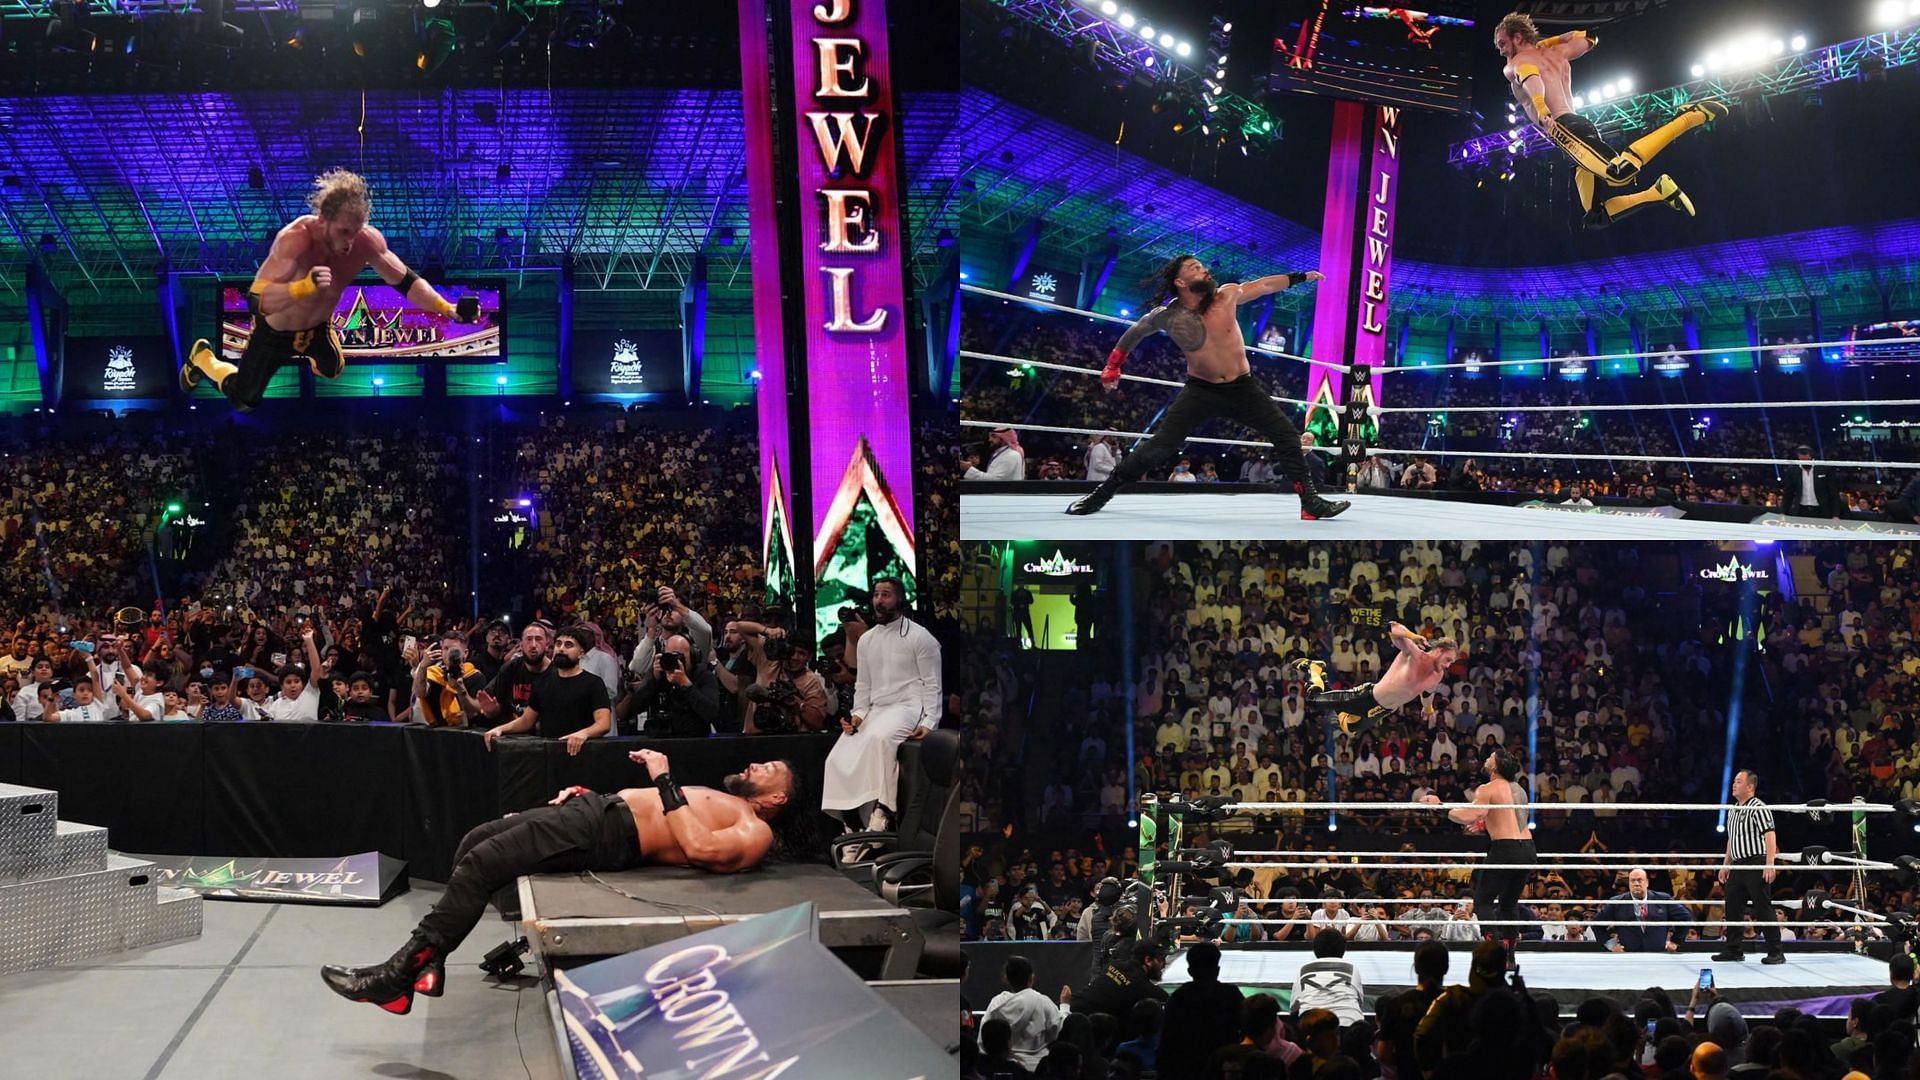 Logan Paul was very close to defeating Roman Reigns at Crown Jewel